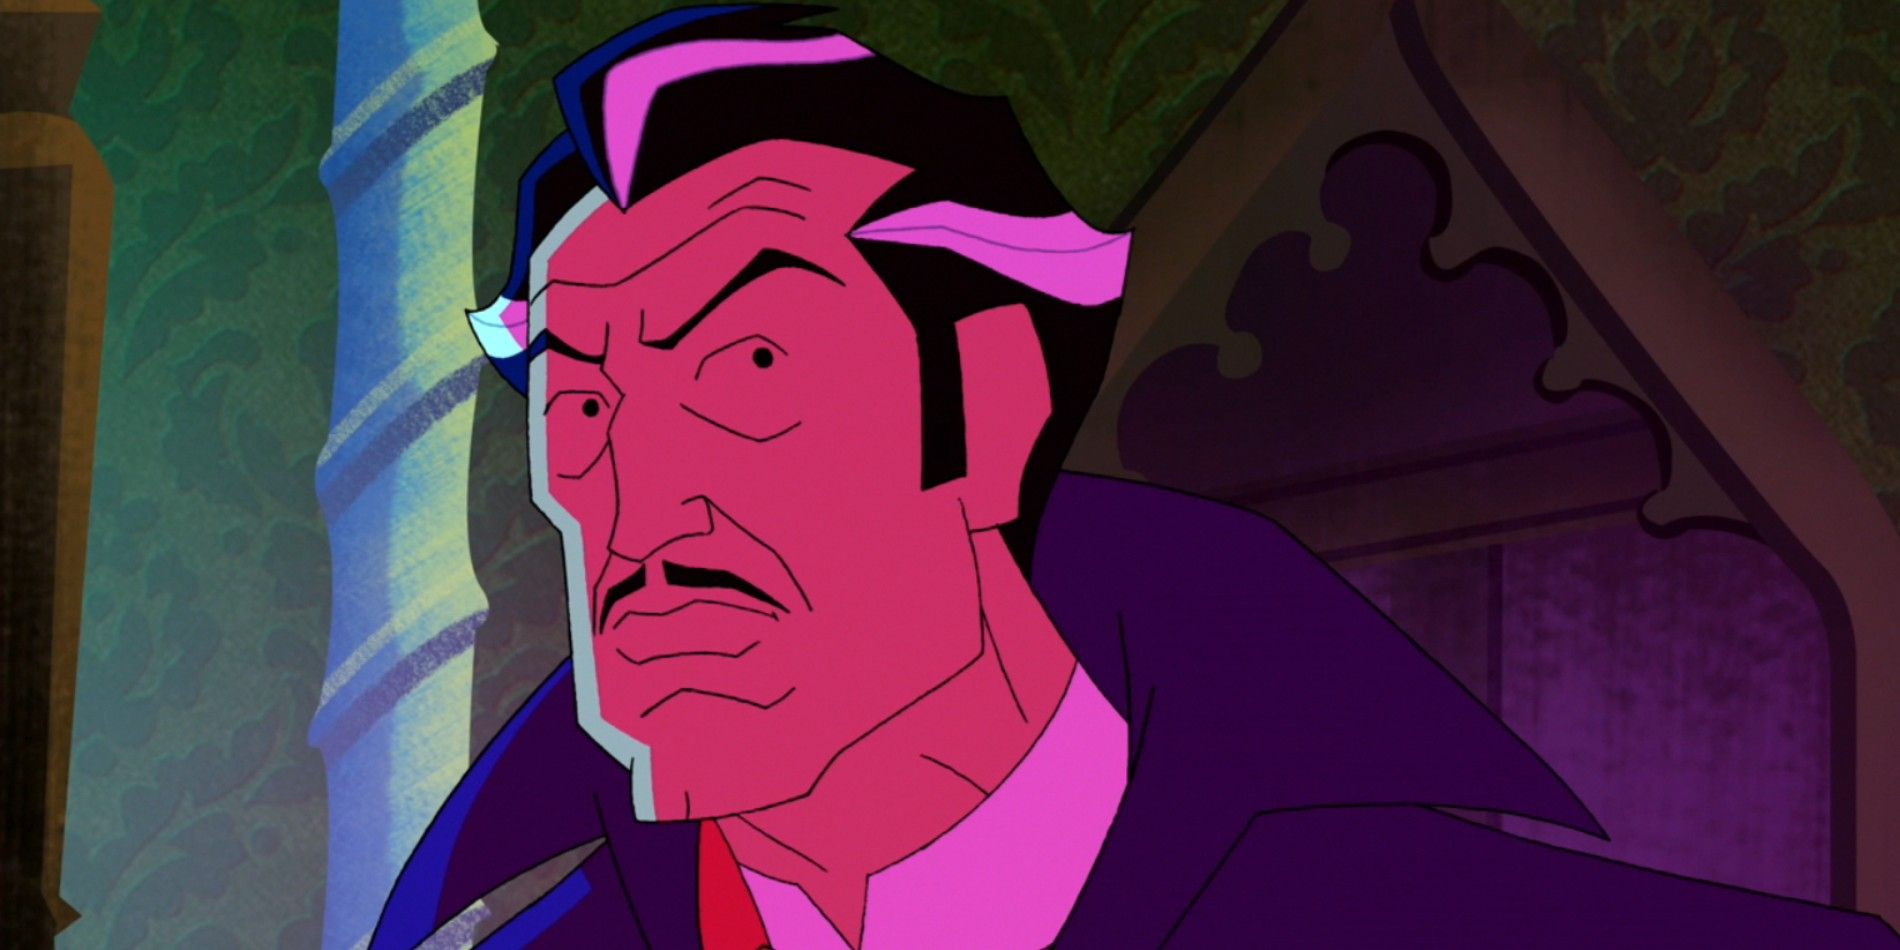 An image of Vincent Van Ghoul from the series, Mystery Incorporated